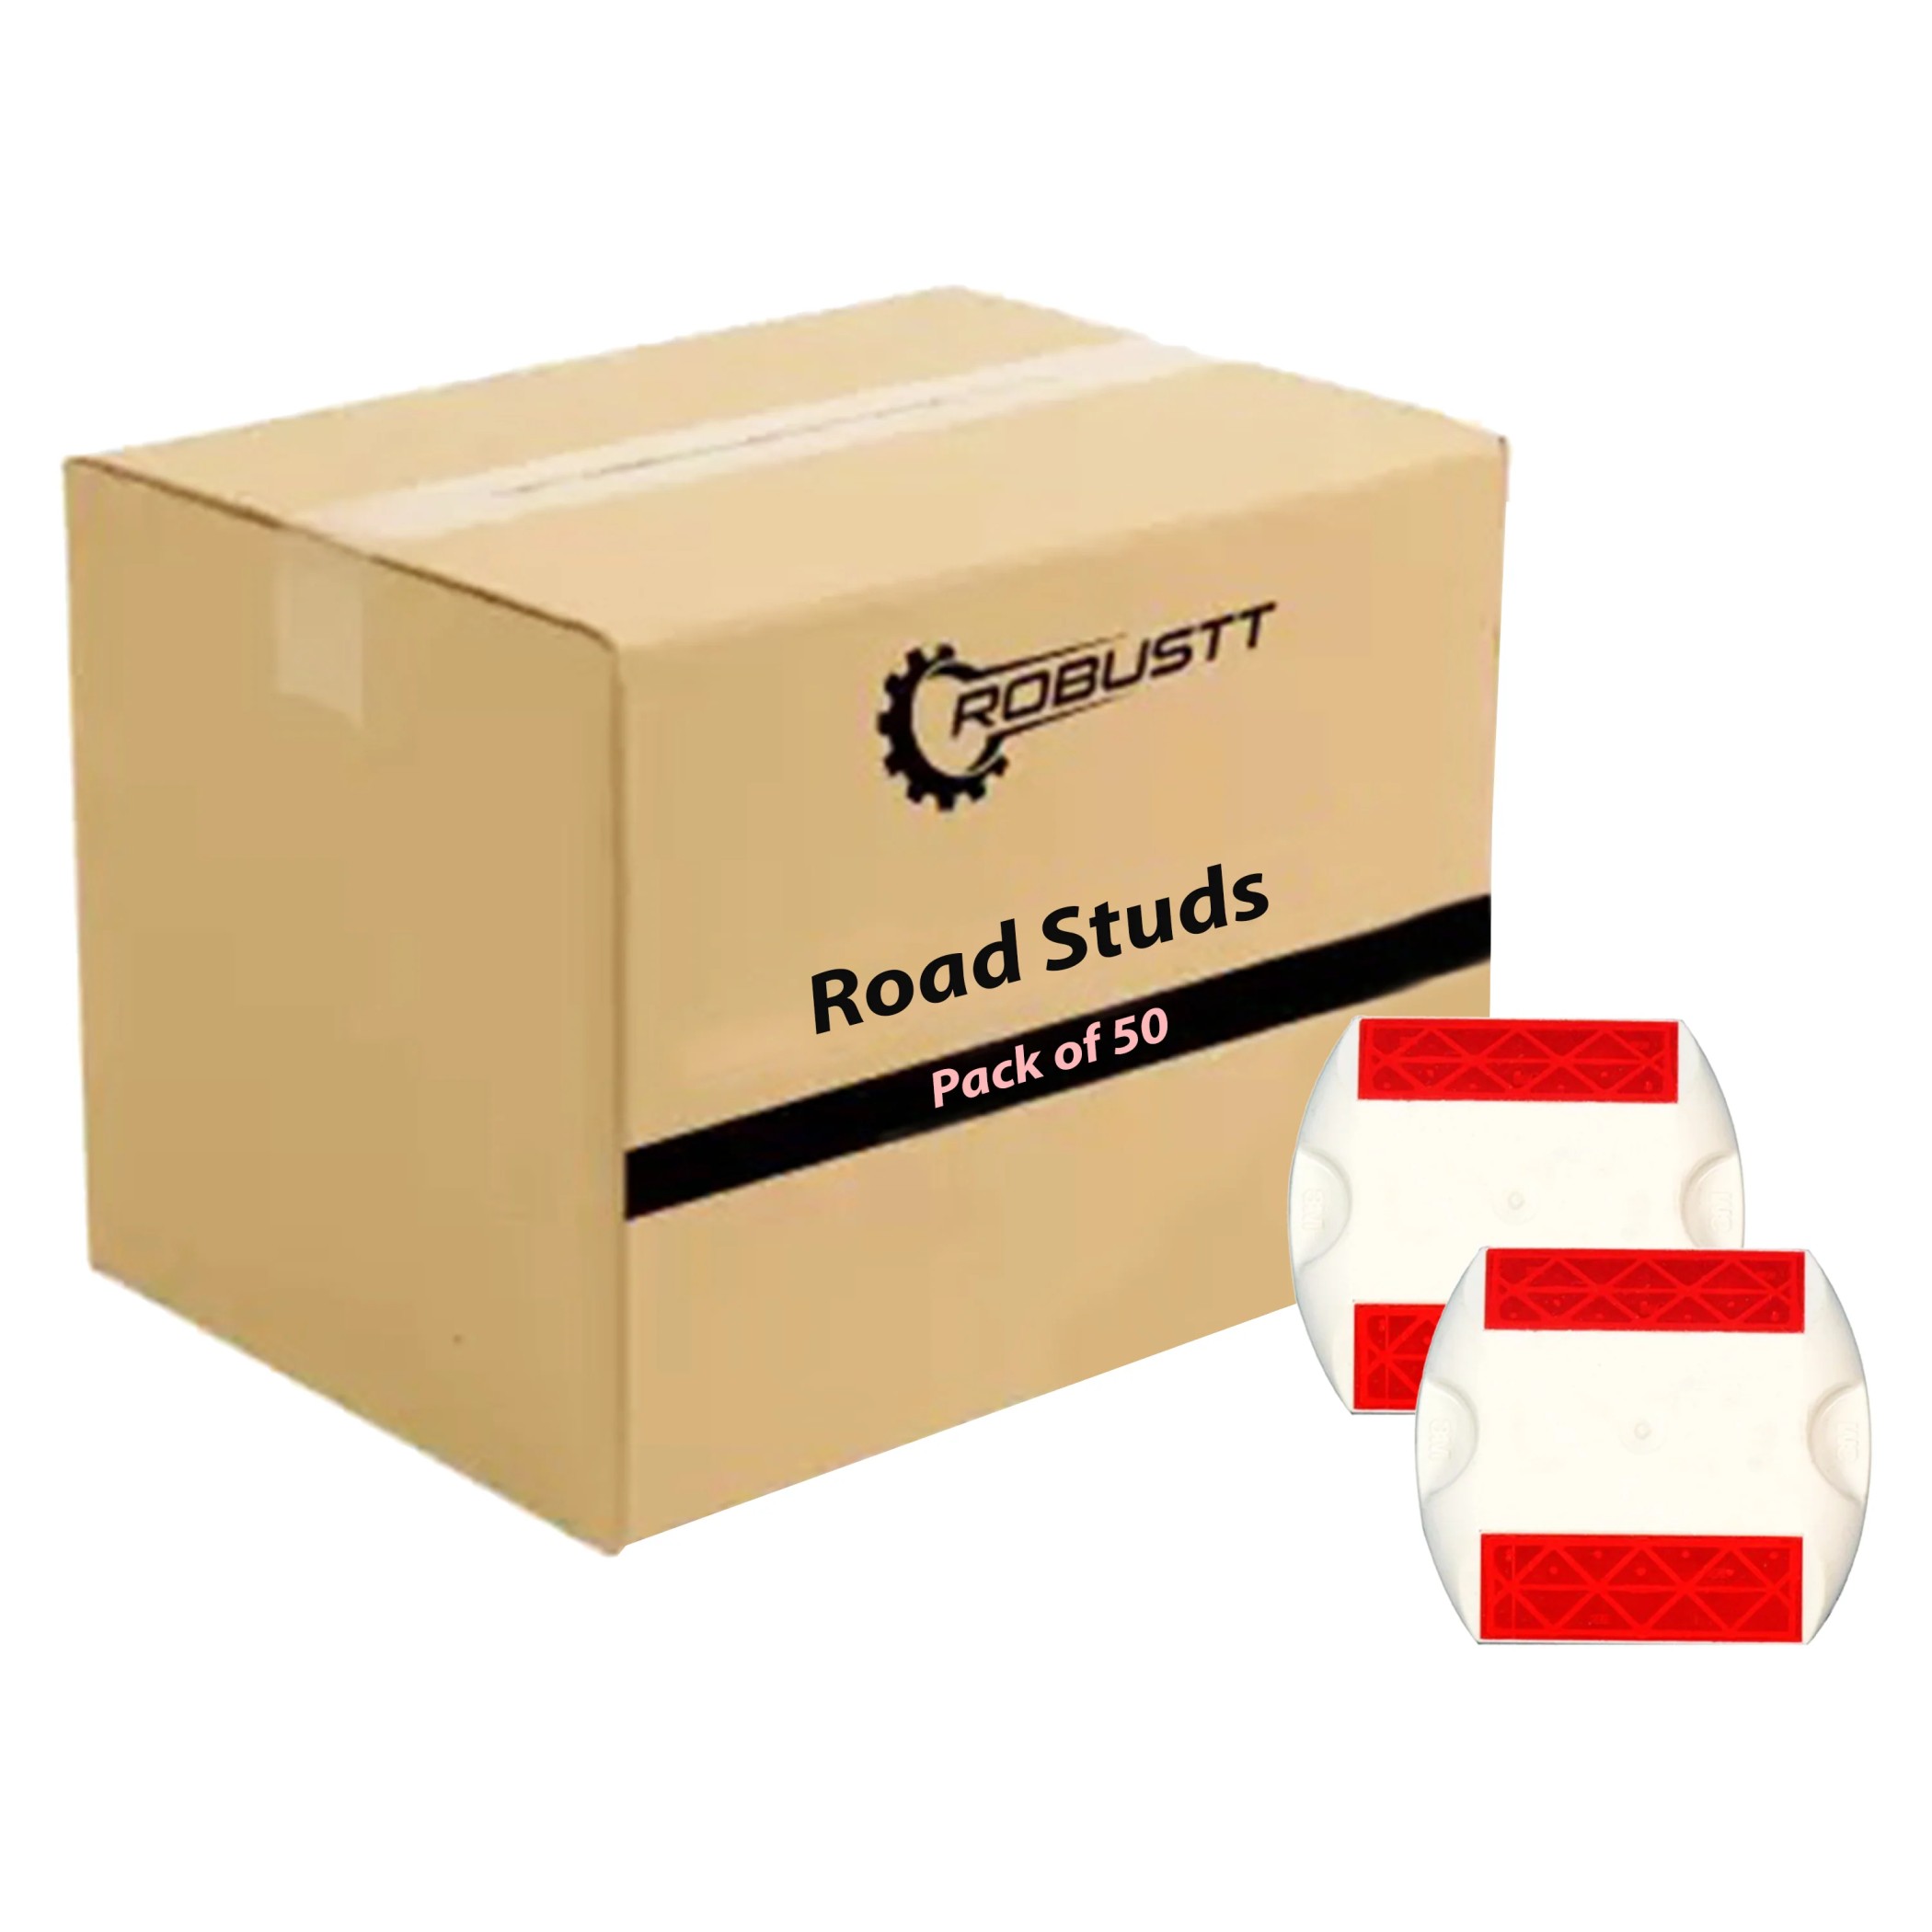 robustt-road-reflector-white-and-red-plastic-abs-road-stud-set-of-50-pieces